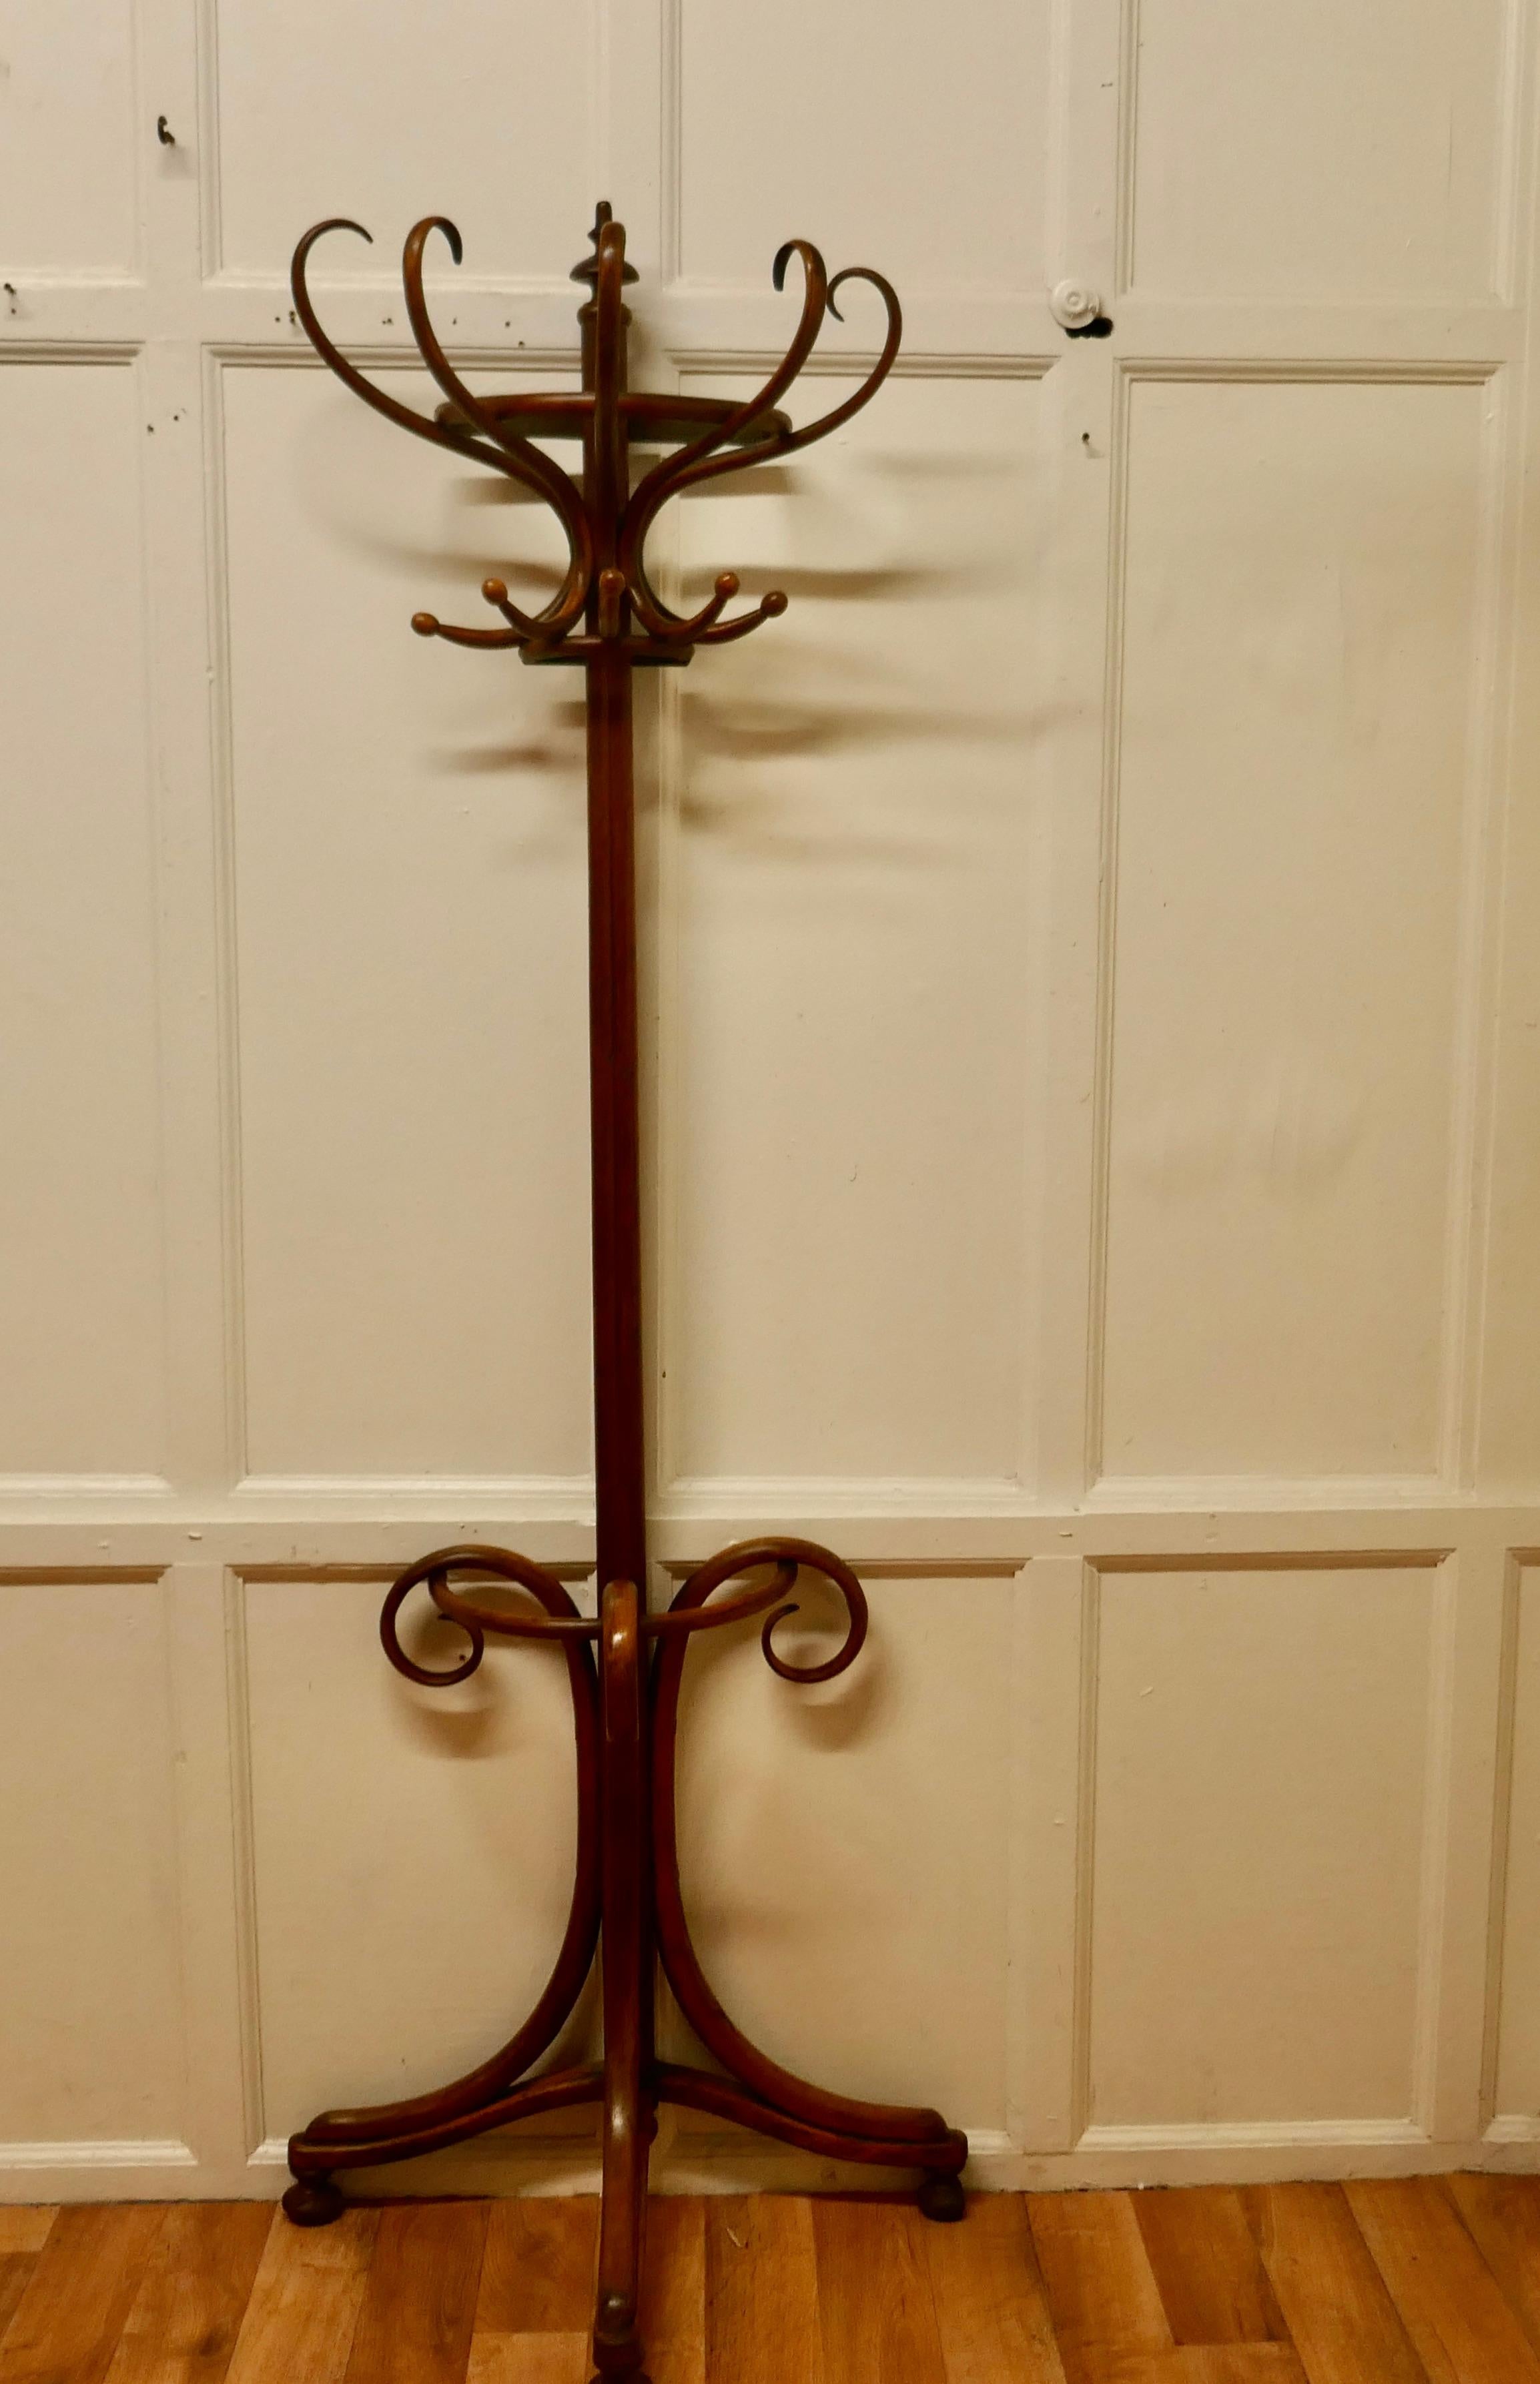 19th Century Bentwood Flat Back Hall Stand

This is an Unusual Large Half Round Hat & Coat Hall Stand, it sits flat against a wall it has 5 Large Curved Bentwood Hat & Coat Hooks at the top and 3 large scrolling Legs forming the umbrella